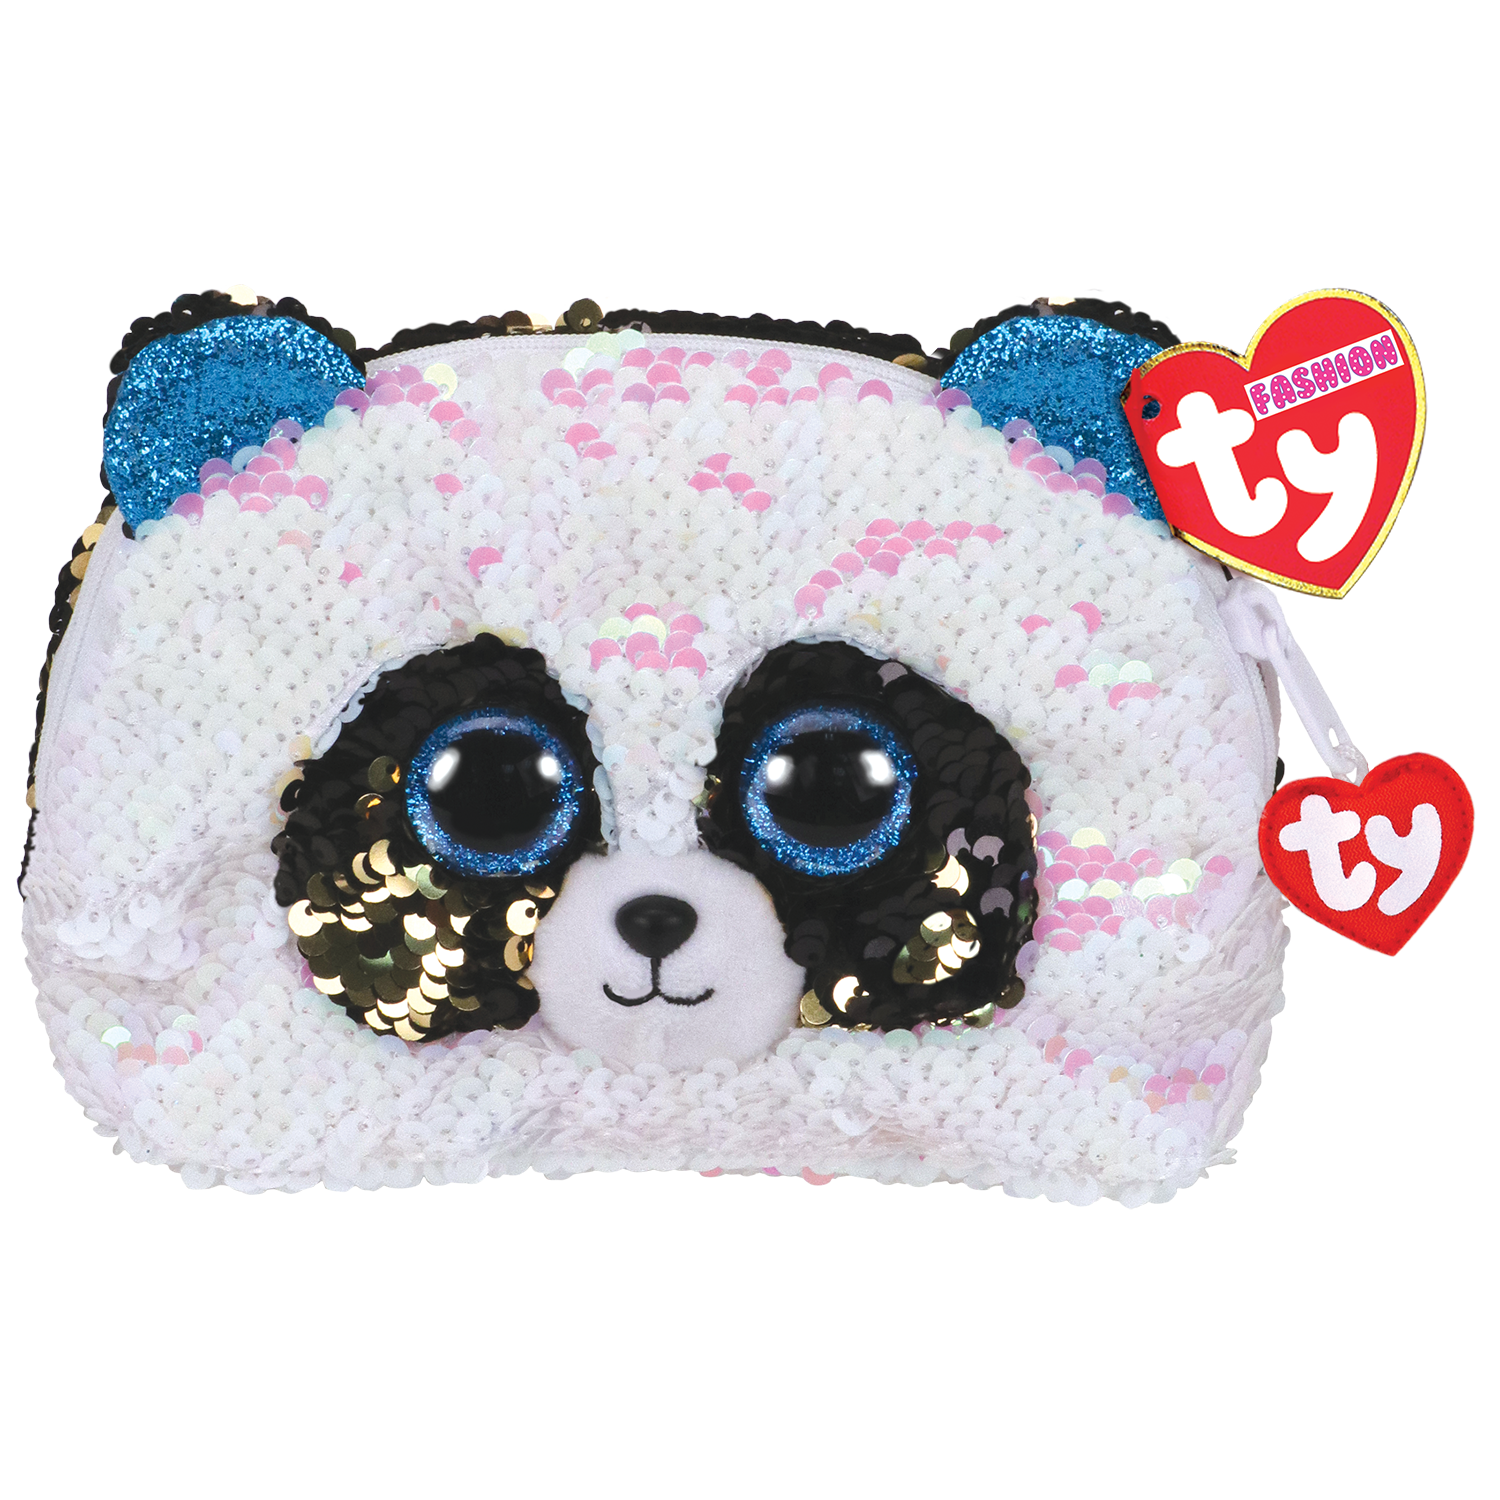 TY Plush - Sequin Accessory Bag - Bamboo the Panda (TY95825)